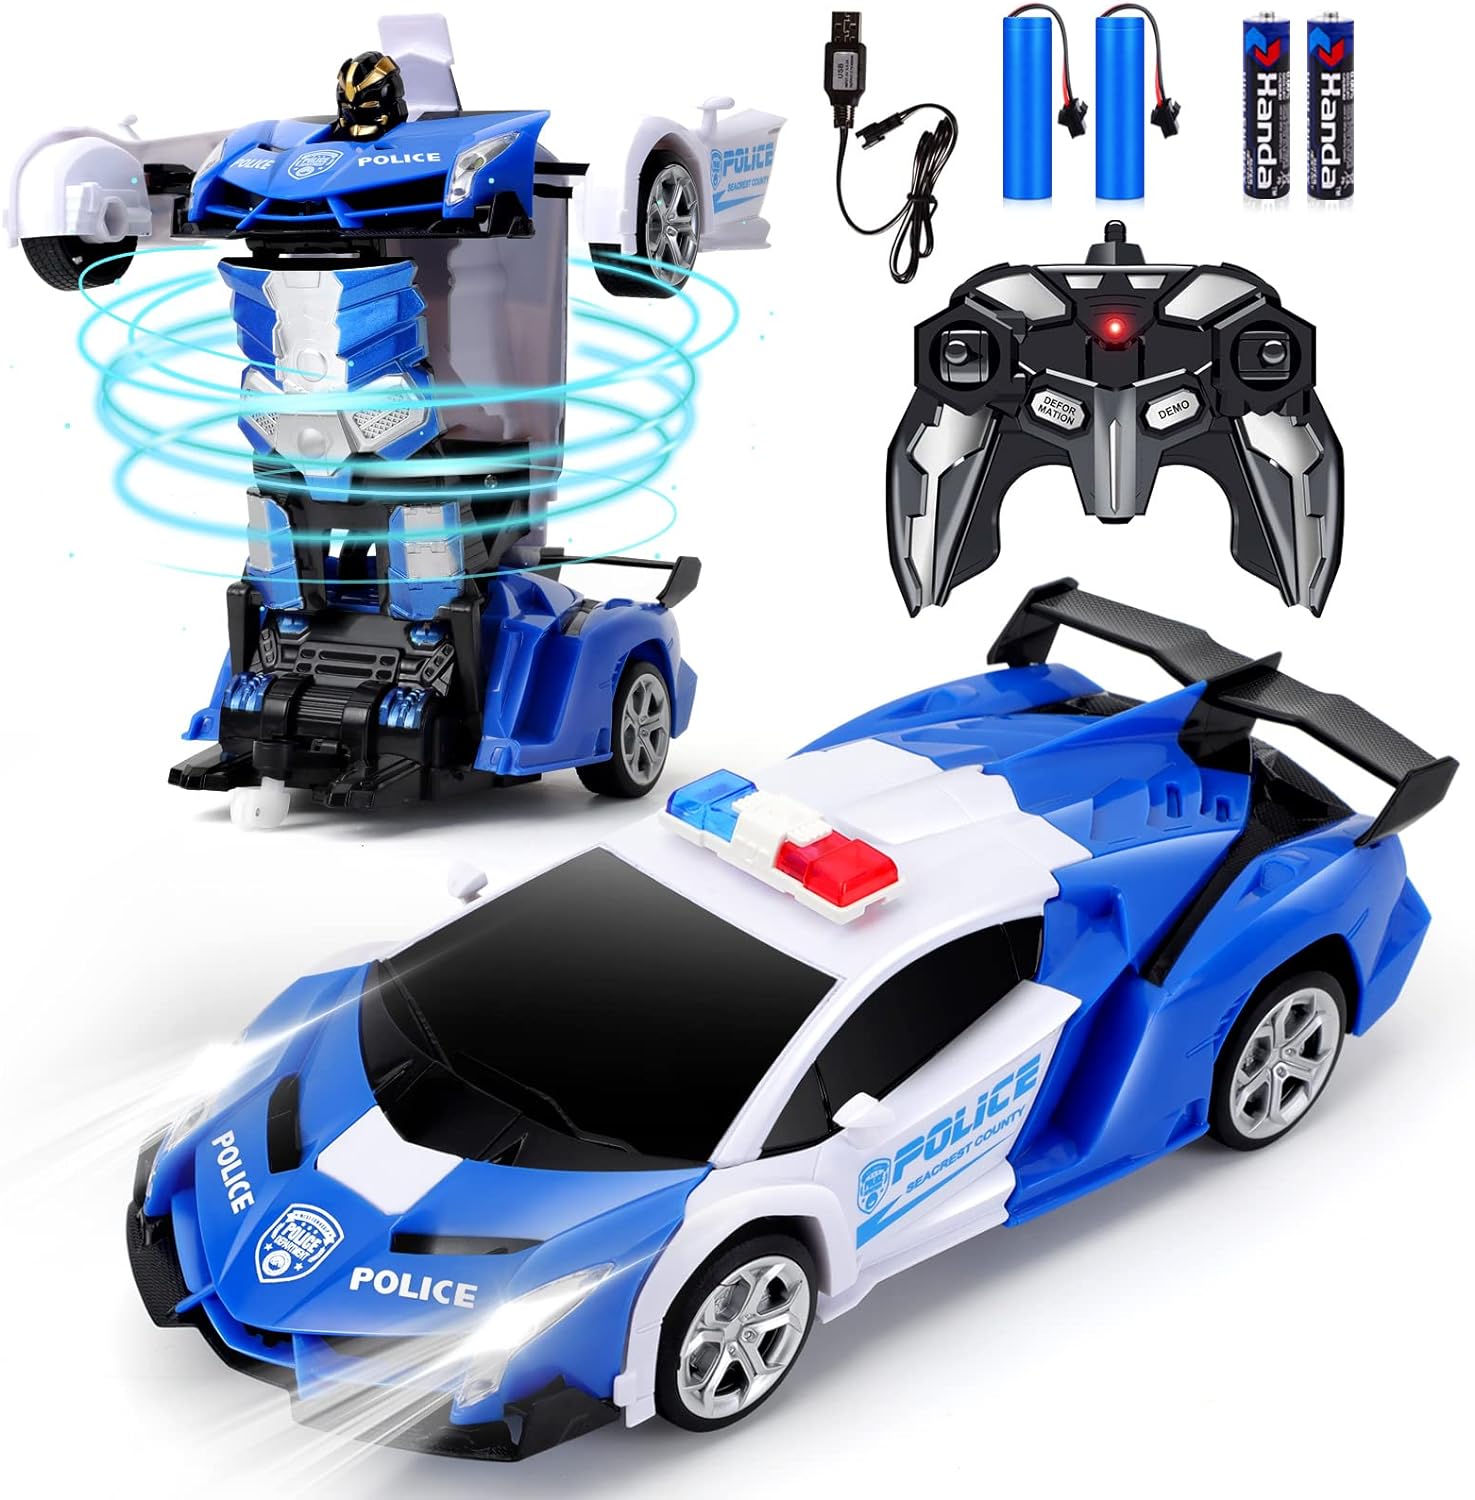 Transform Robot RC Cars Contains All Batteries: One-Button Deformation and 360 Degree Rotating Drifting